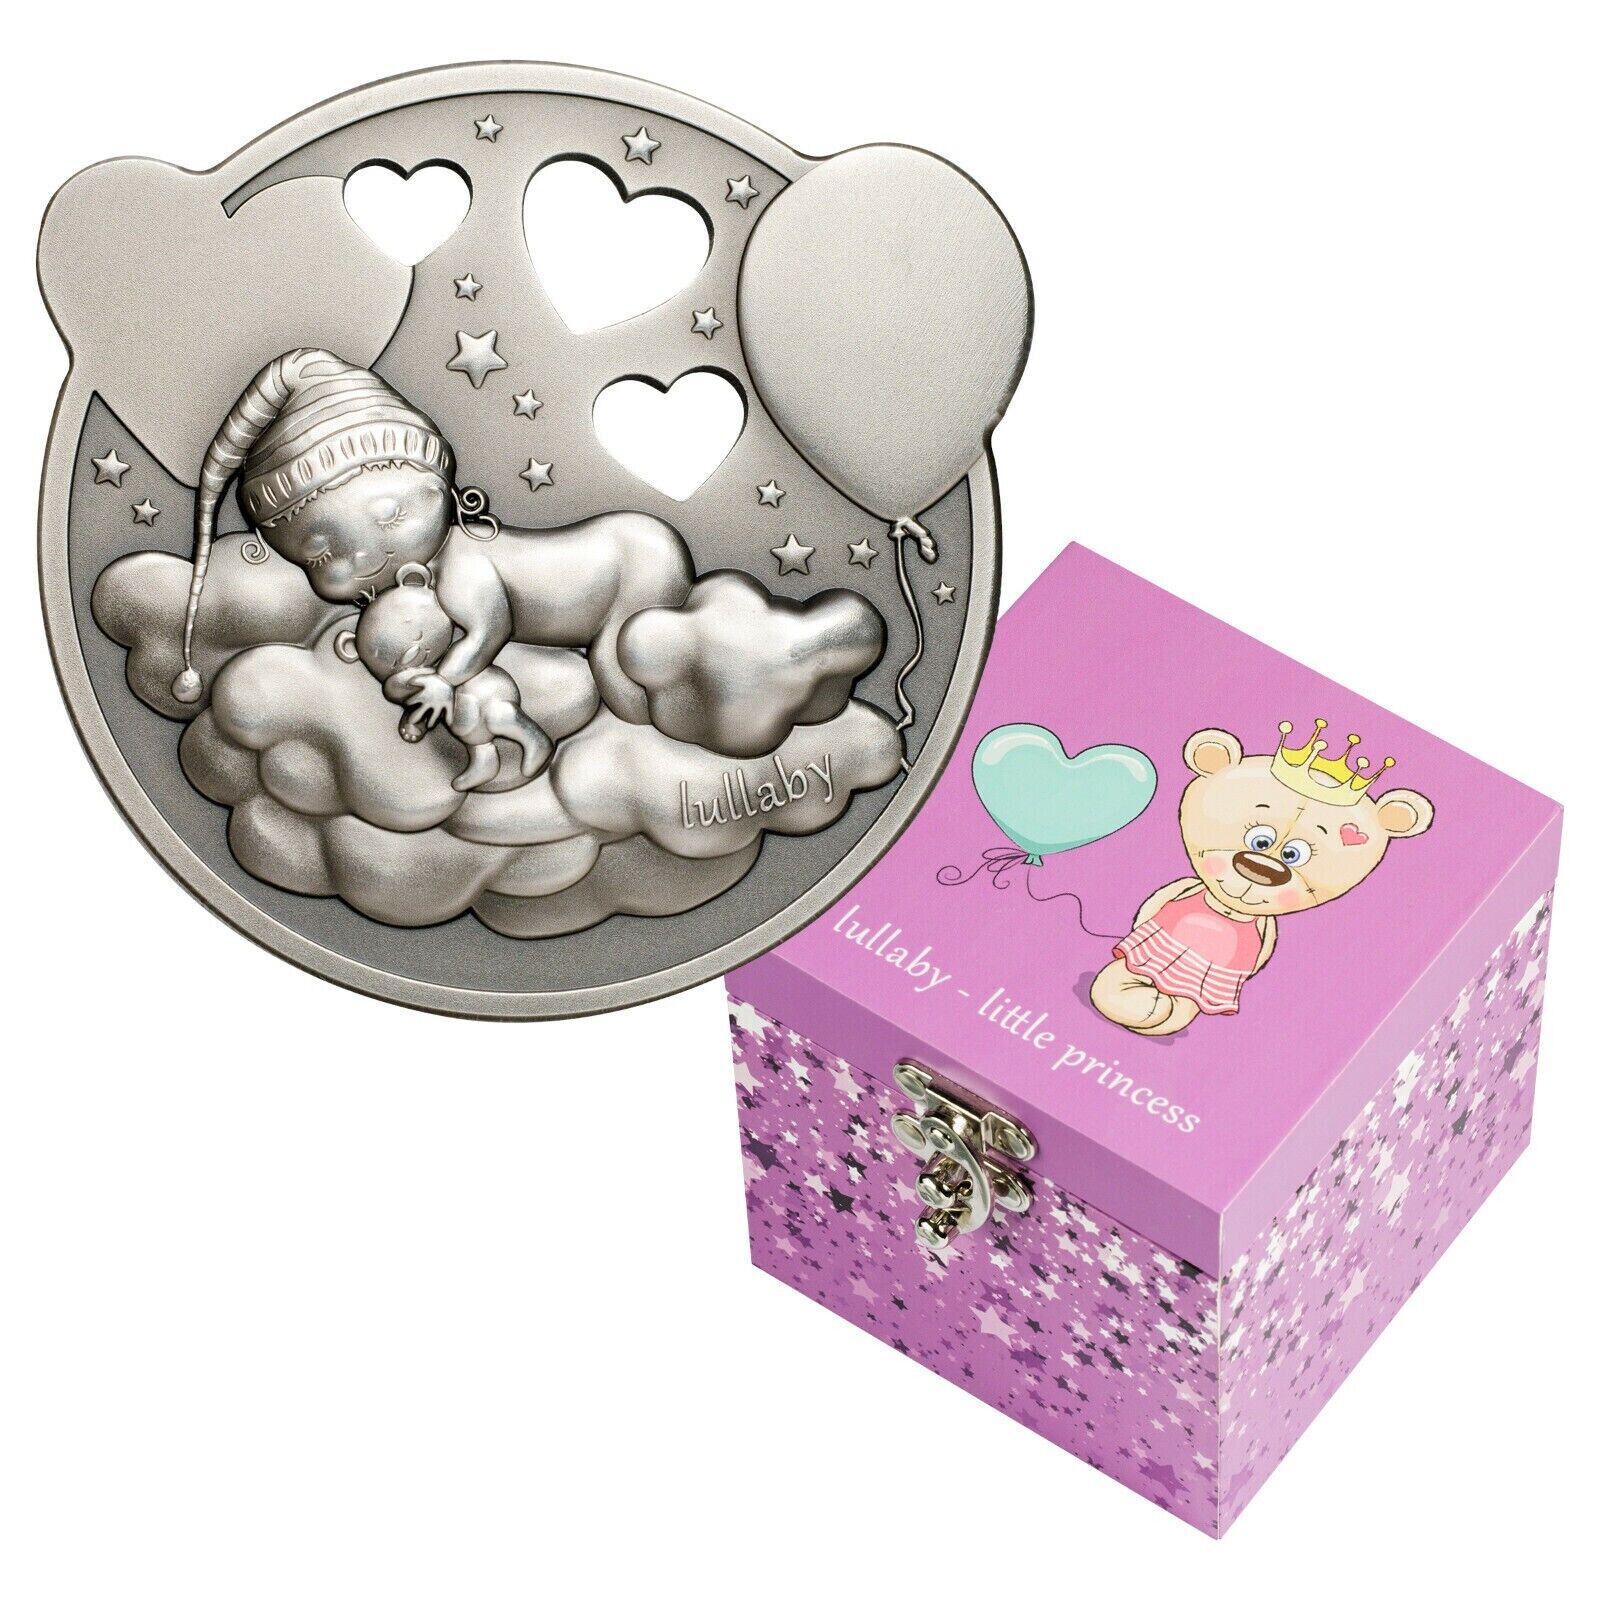 1 oz Silver Coin 2019 Cook Islands $5 Lullaby Little Princess Pink Music Box